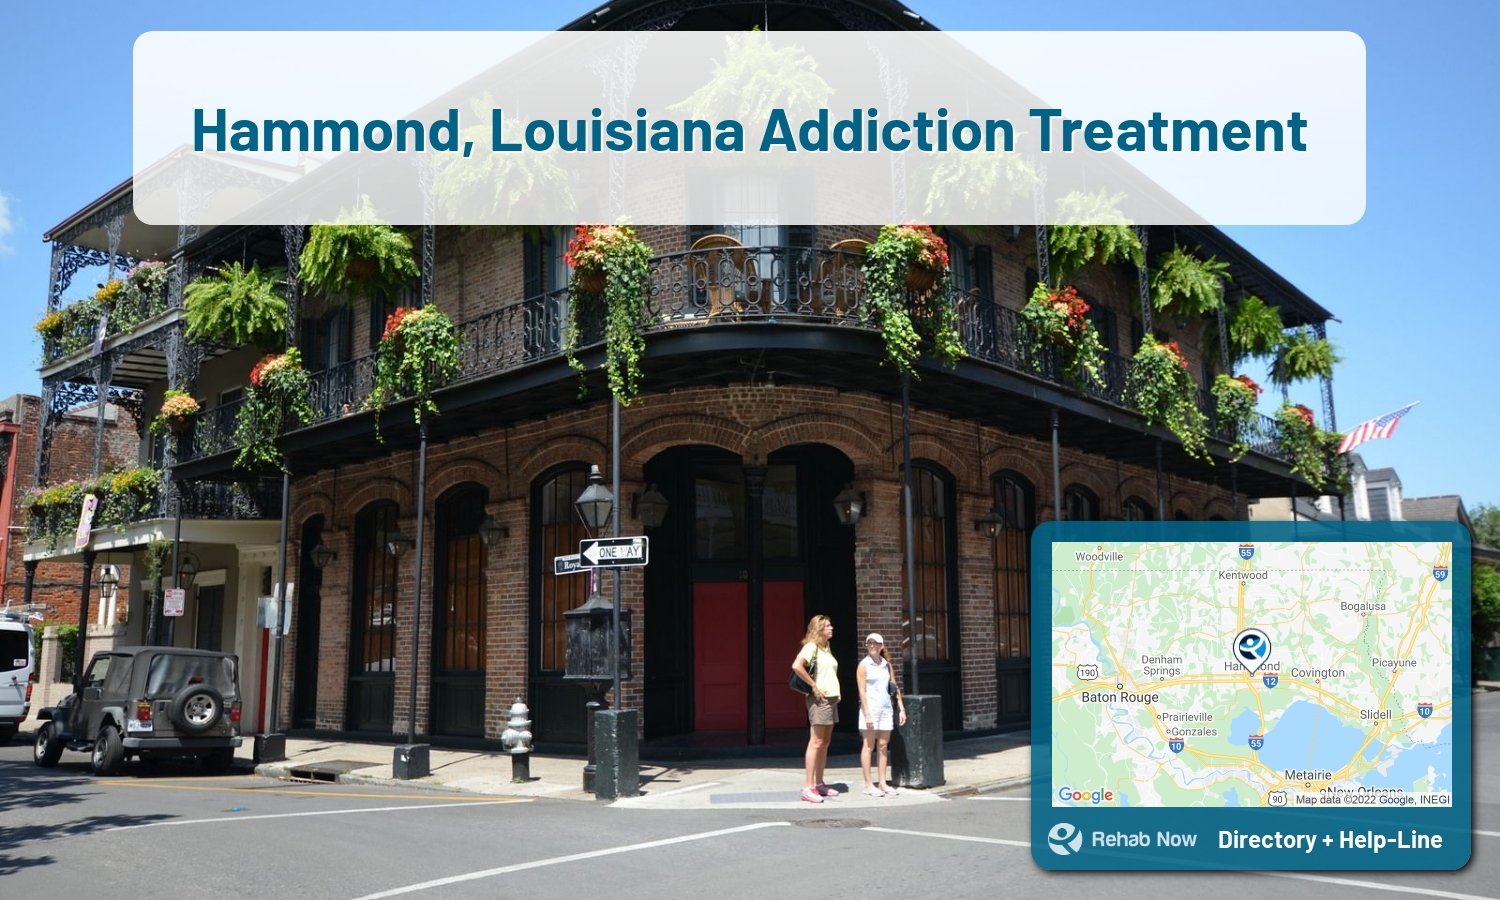 Hammond, LA Treatment Centers. Find drug rehab in Hammond, Louisiana, or detox and treatment programs. Get the right help now!